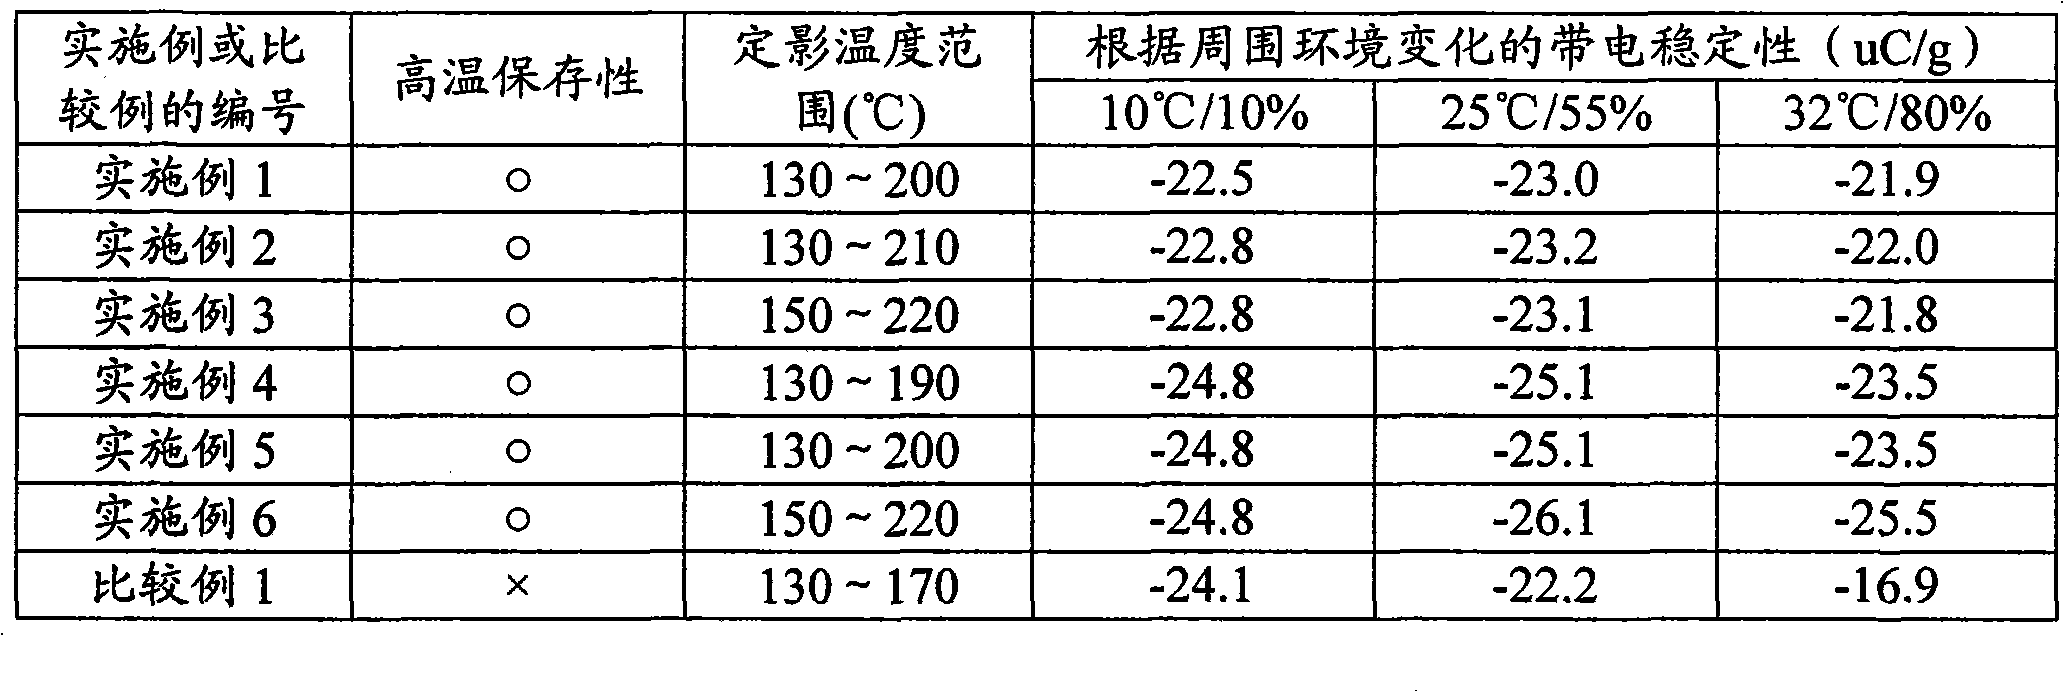 Toner using resin insoluble in organic solvents and preparation method thereof